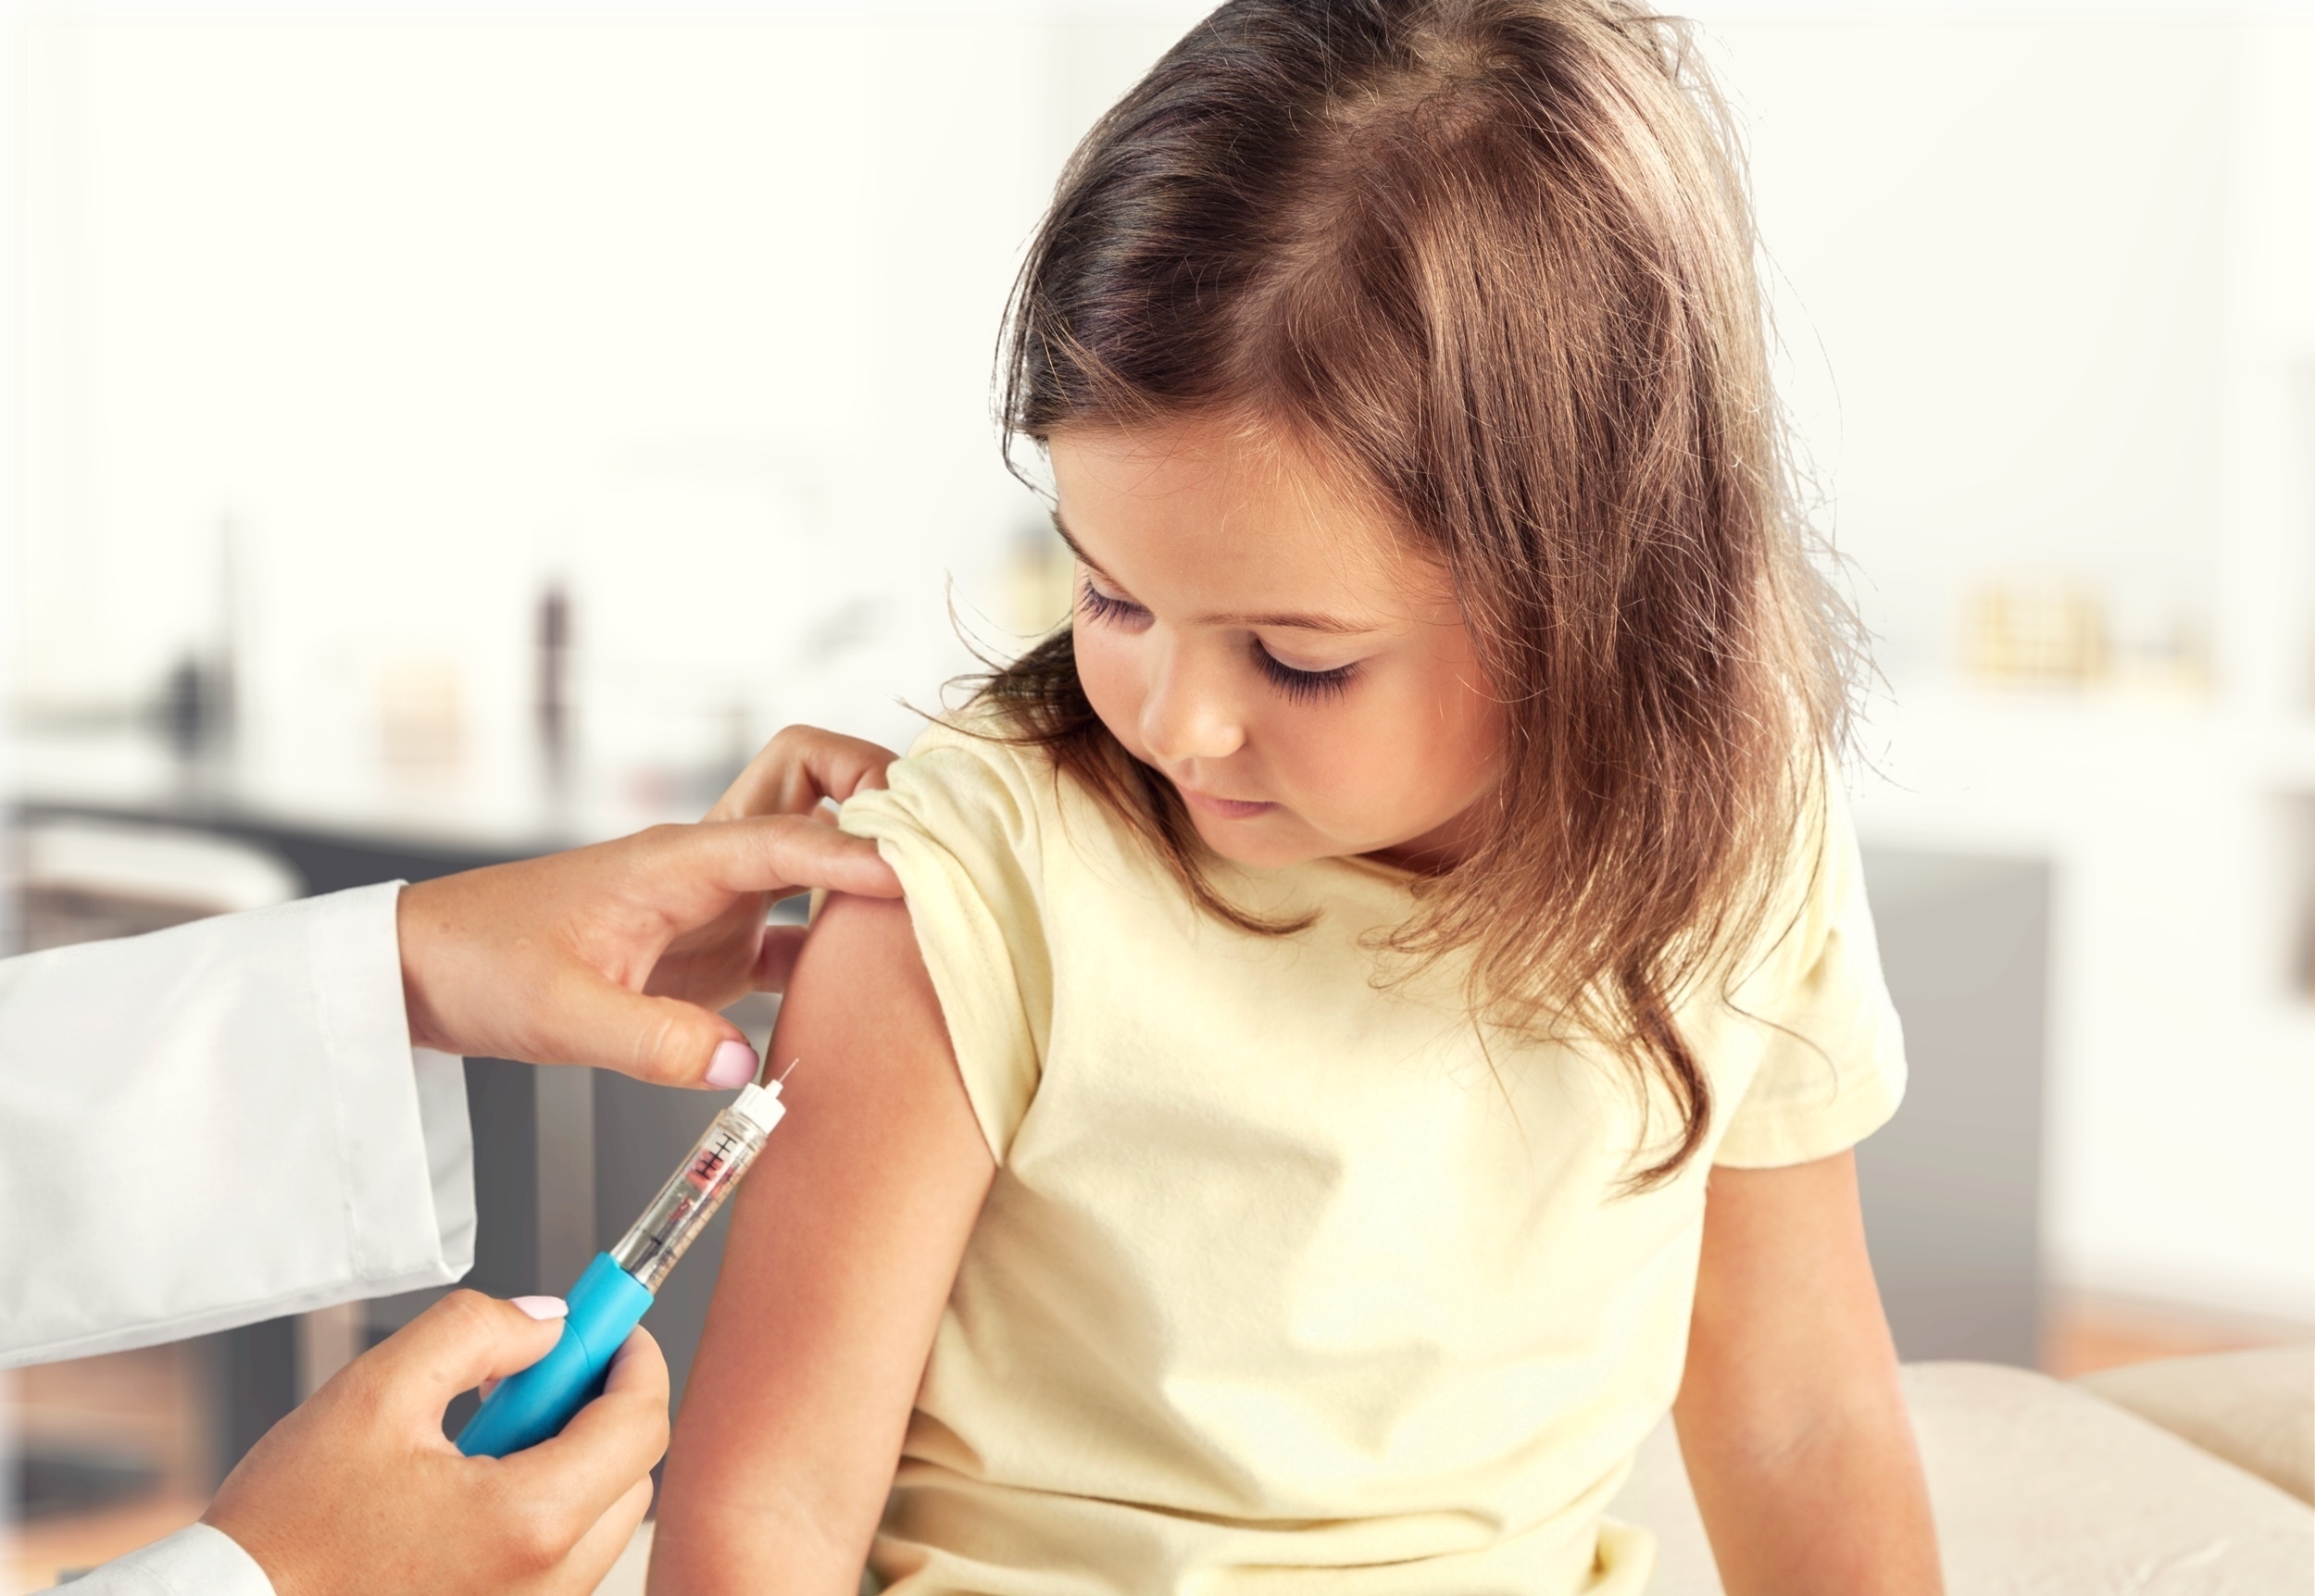 Mandatory and recommended vaccinations for children